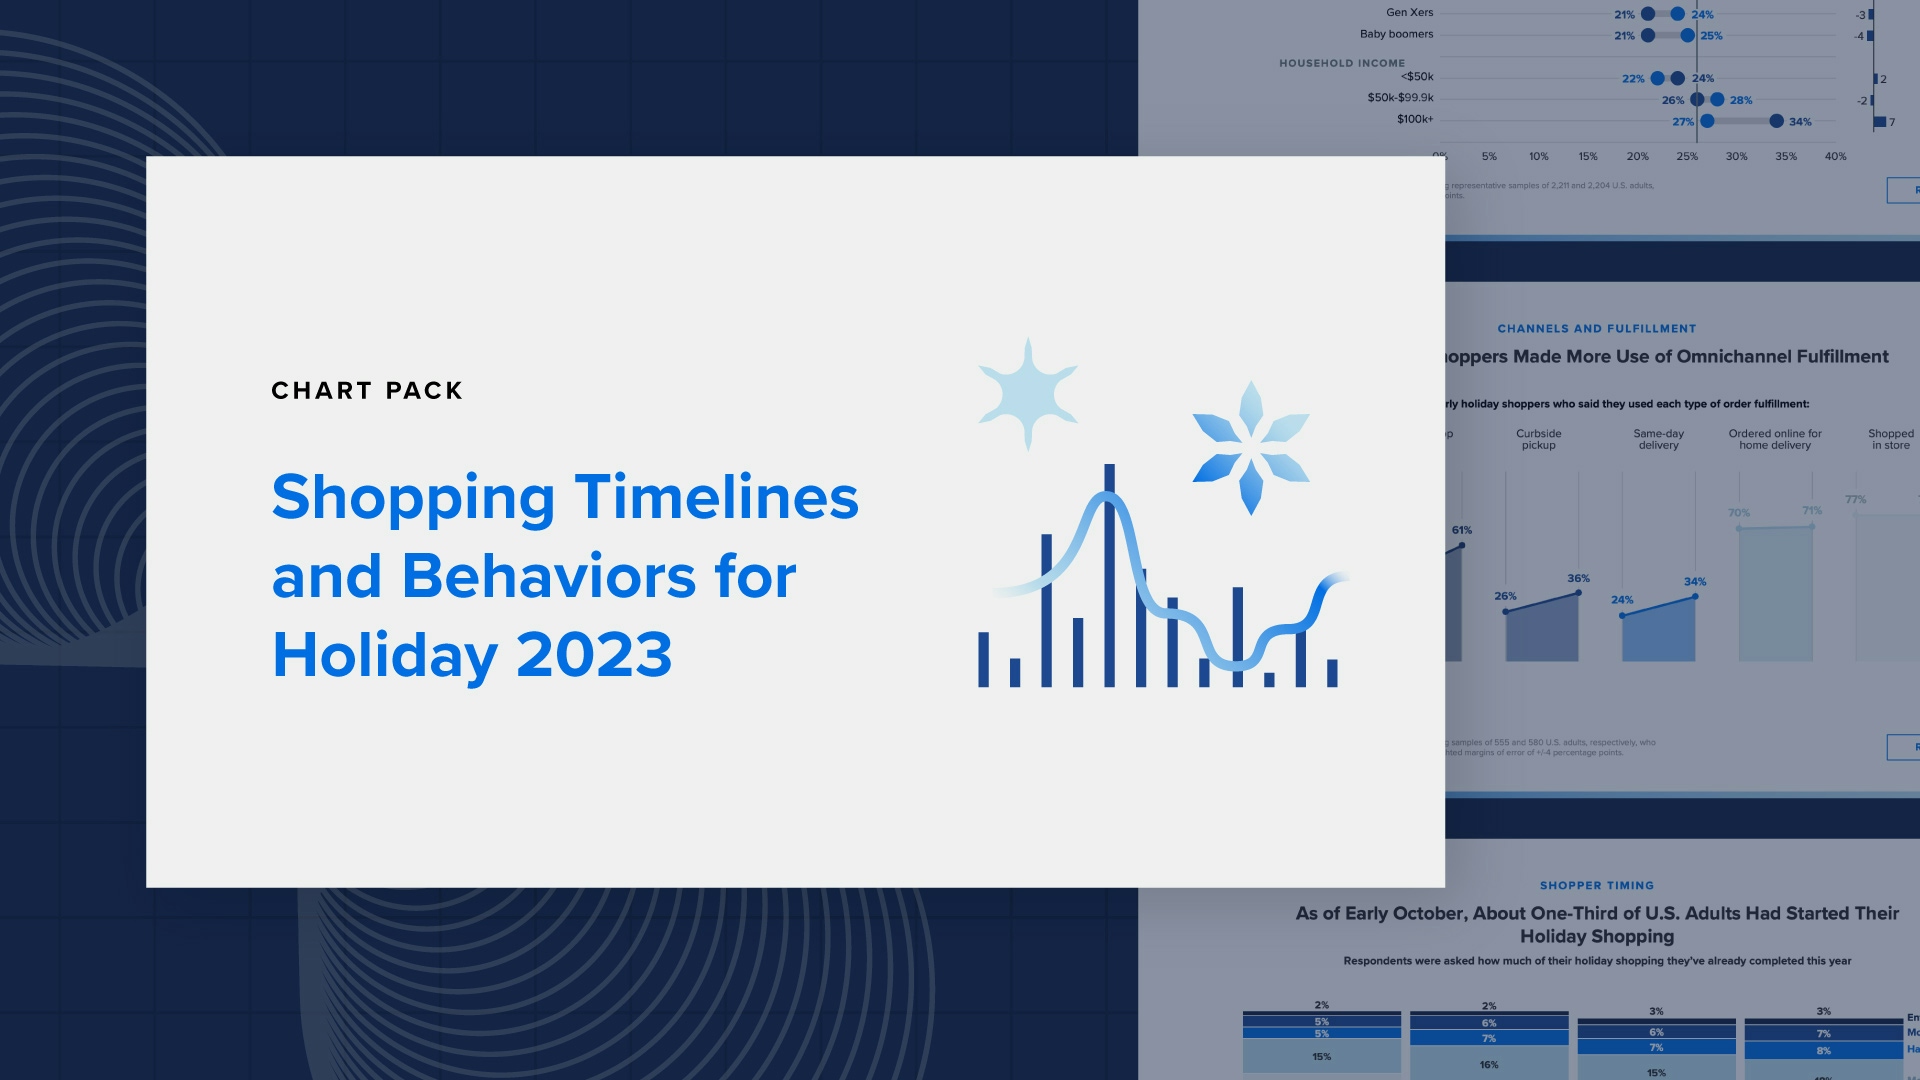 Download the Chart Pack: 2023 Holiday Shopping Behaviors and Timelines in 10+ Charts